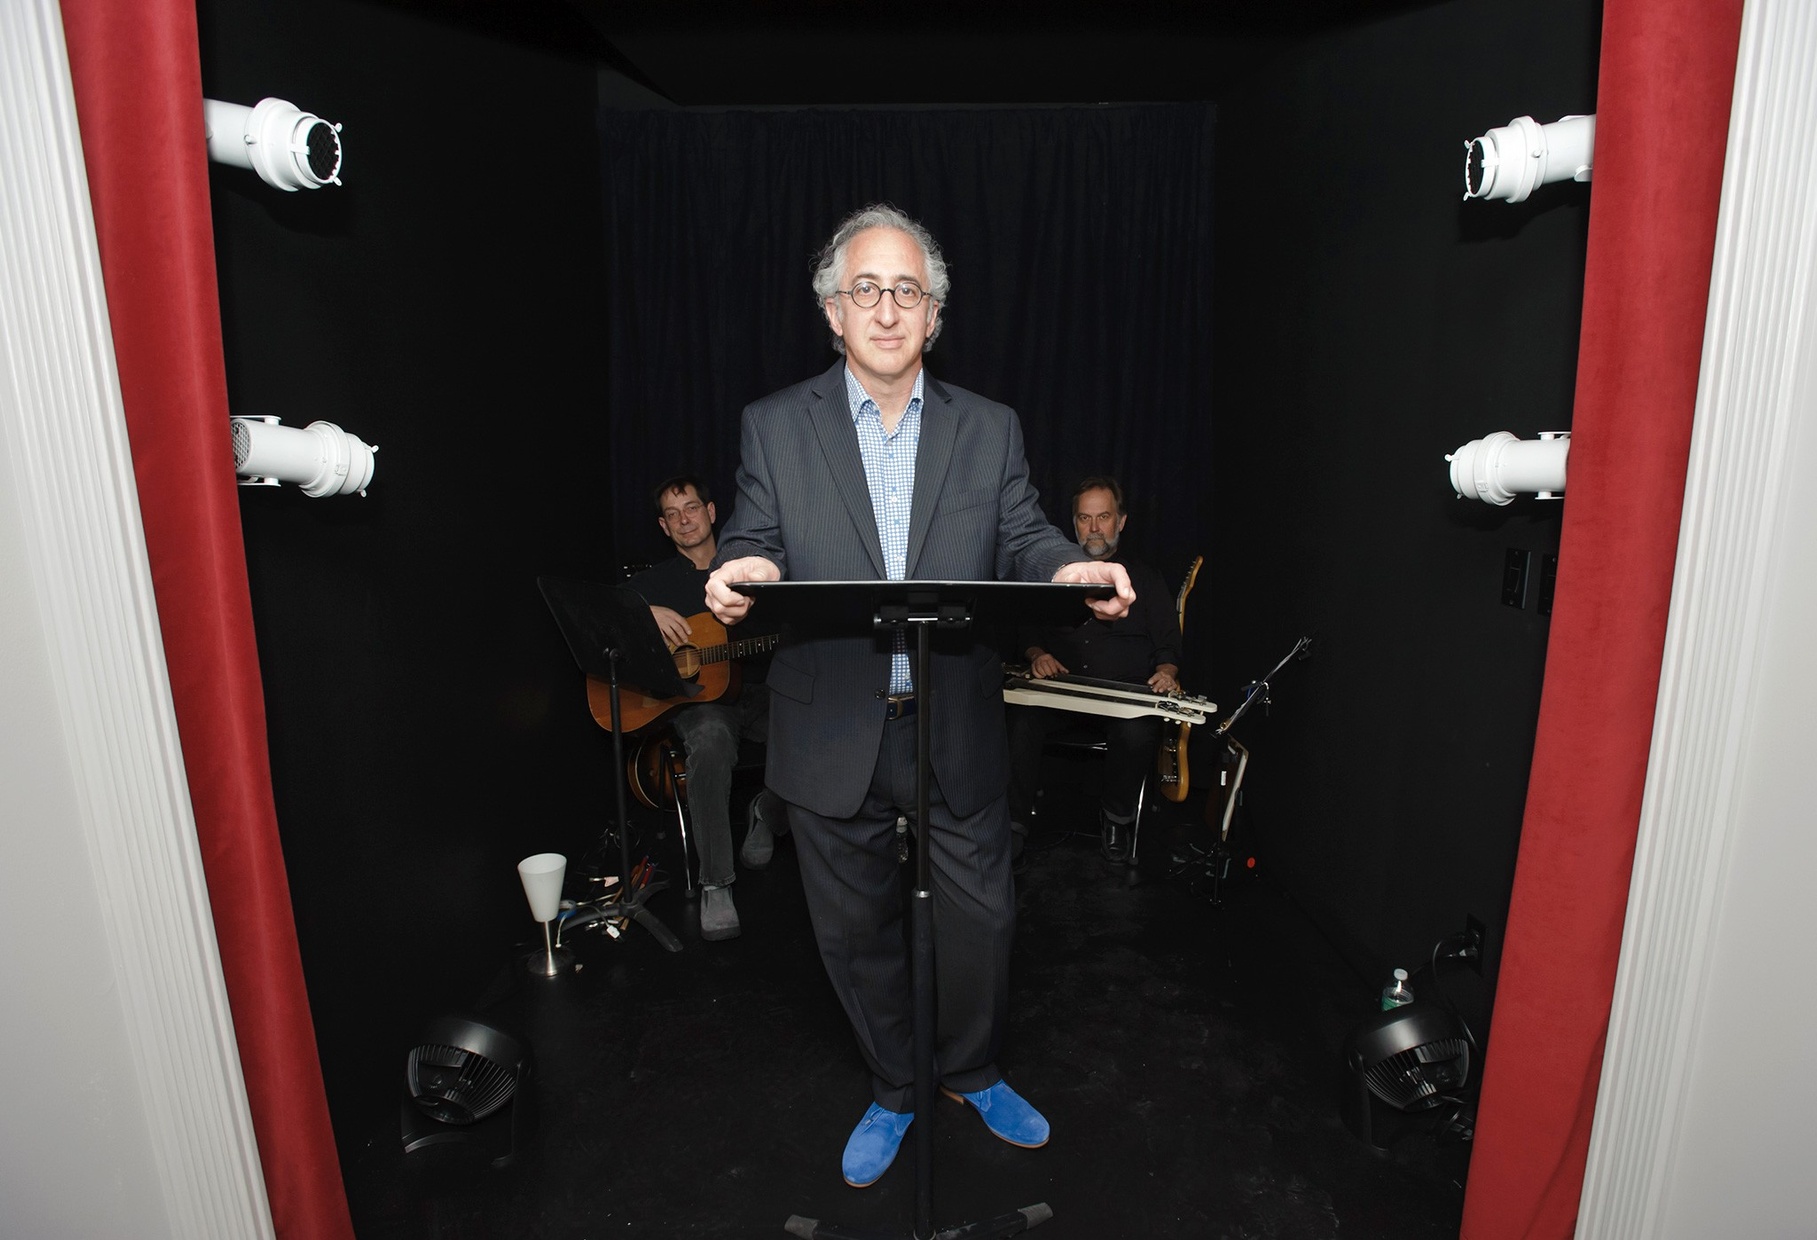 An older, tanned man stands behind a music stand in a black room with two men sitting behind him holding stringed instruments.